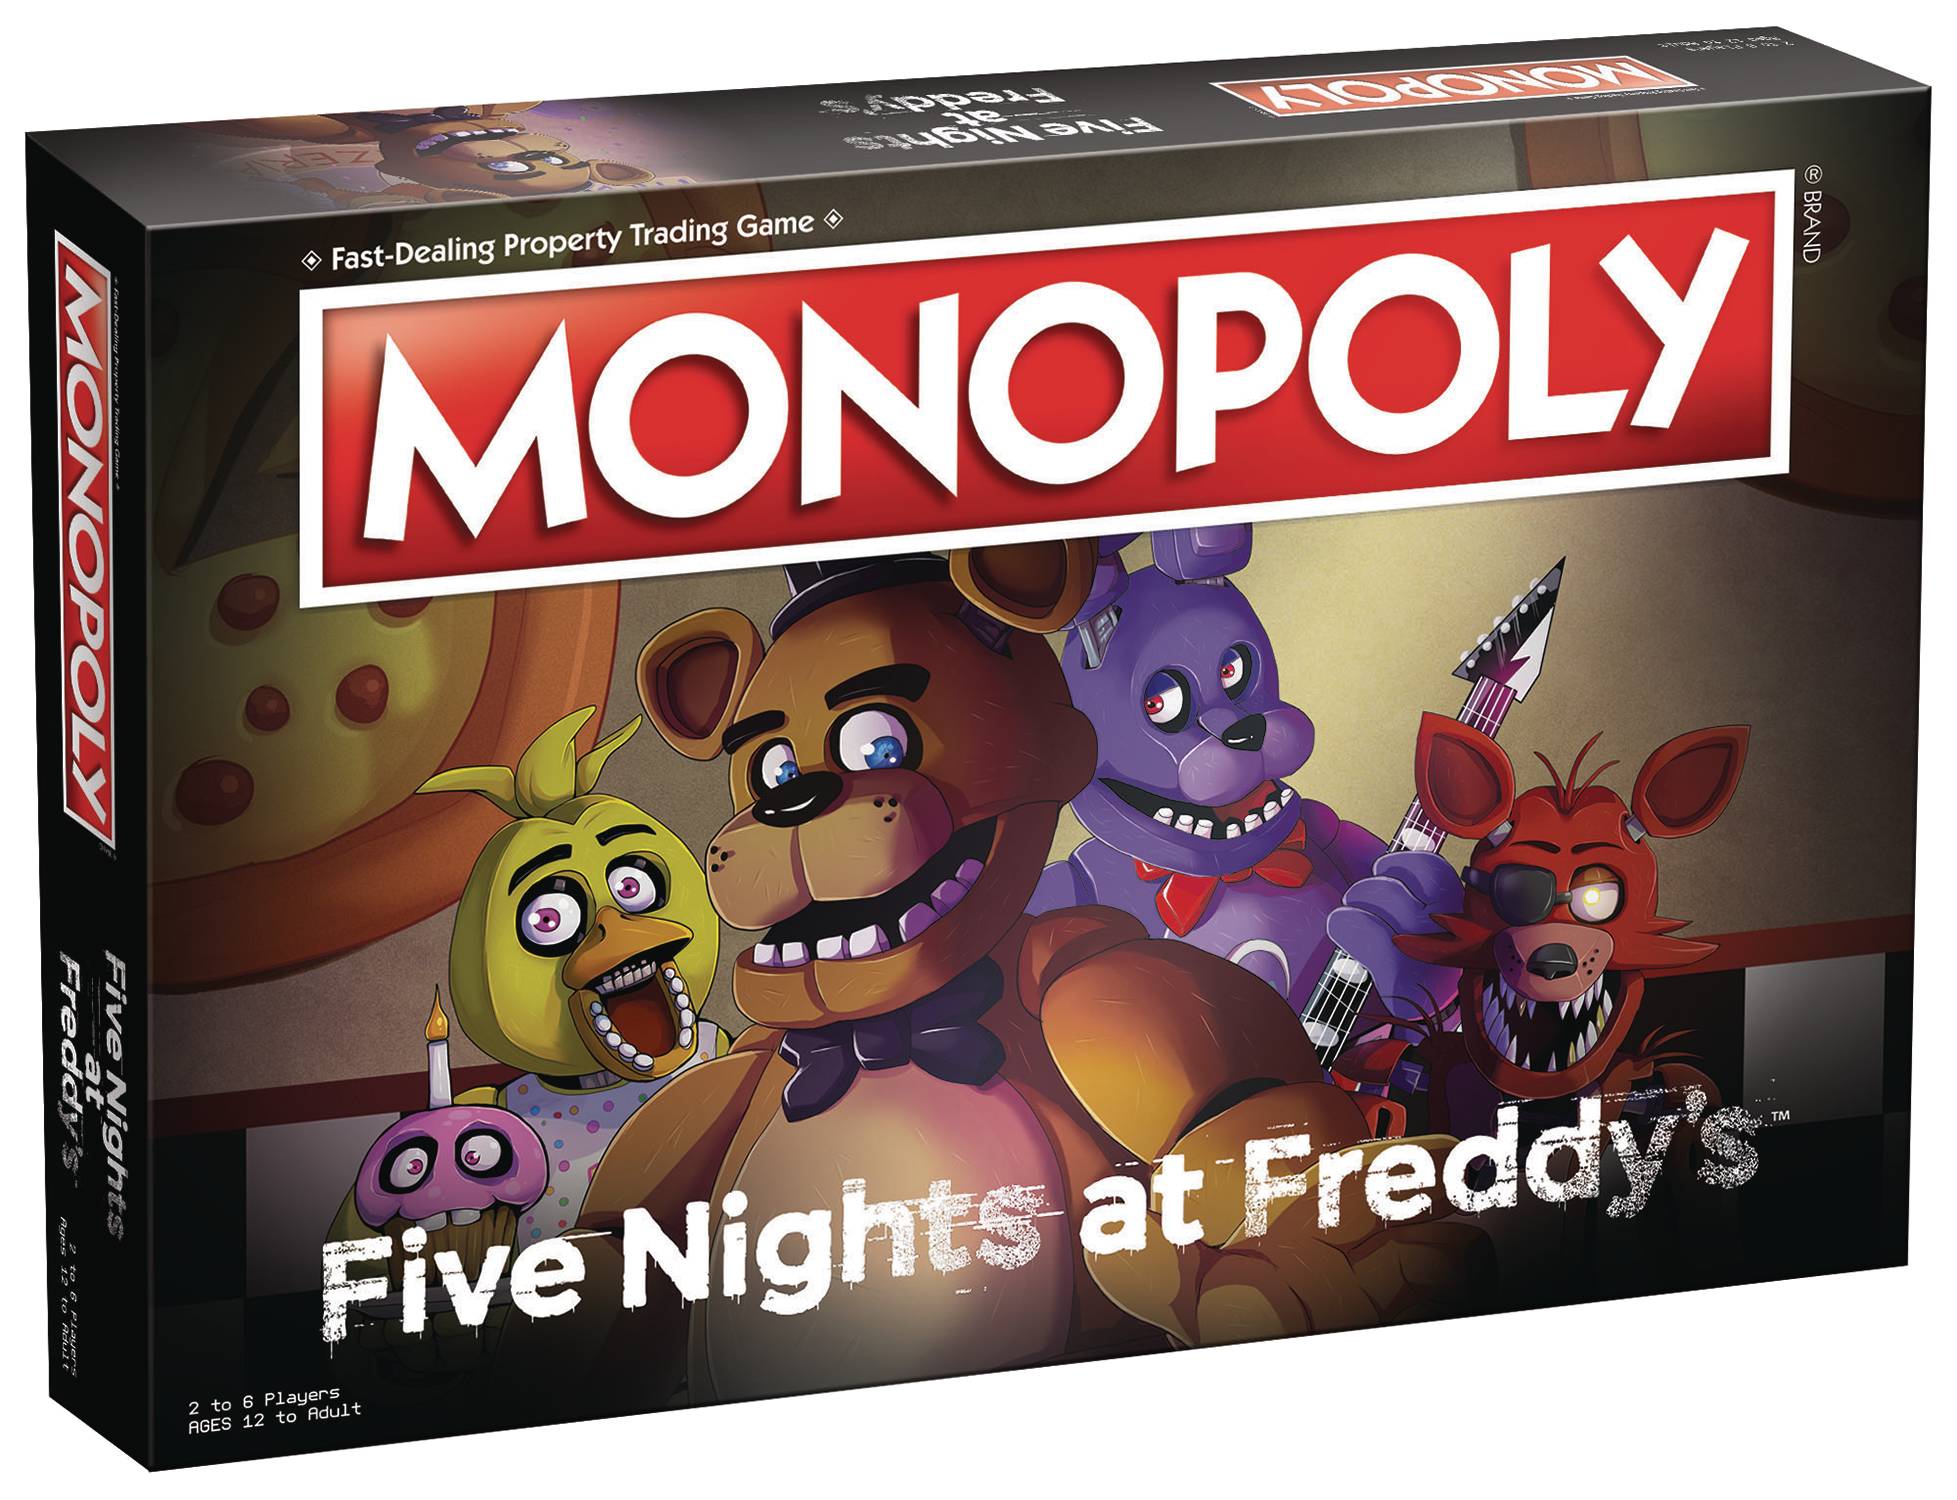 Five Nights at Freddys Monopoly Board Game